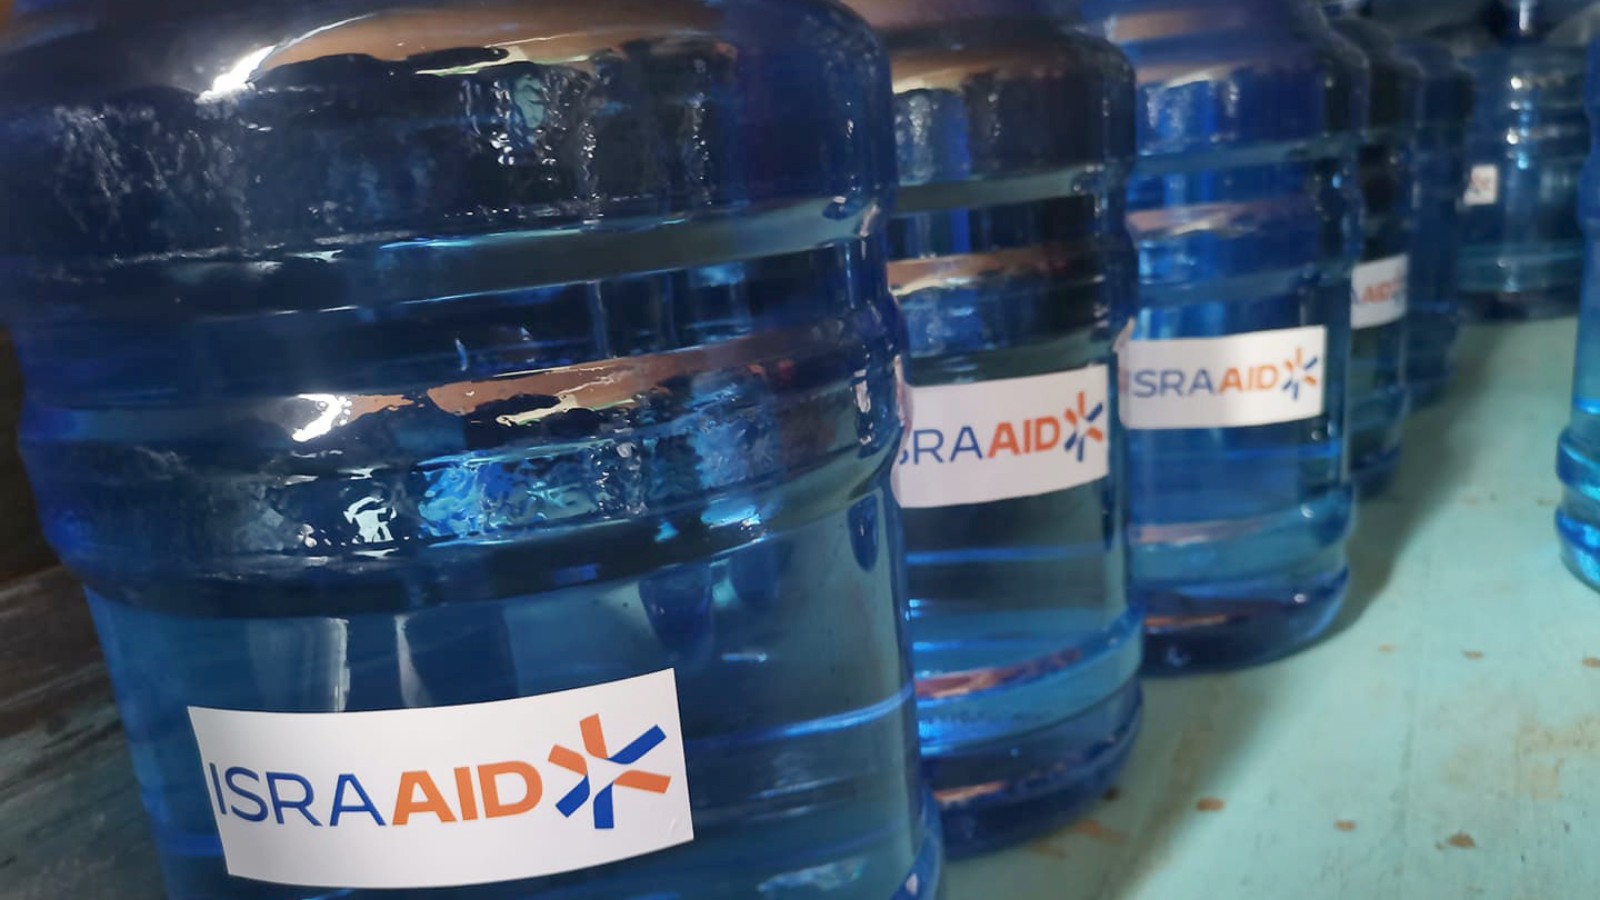 Water is being distributed in the Philippines following Super Typhoon Rai/Odette. Photo courtesy of IsraAID